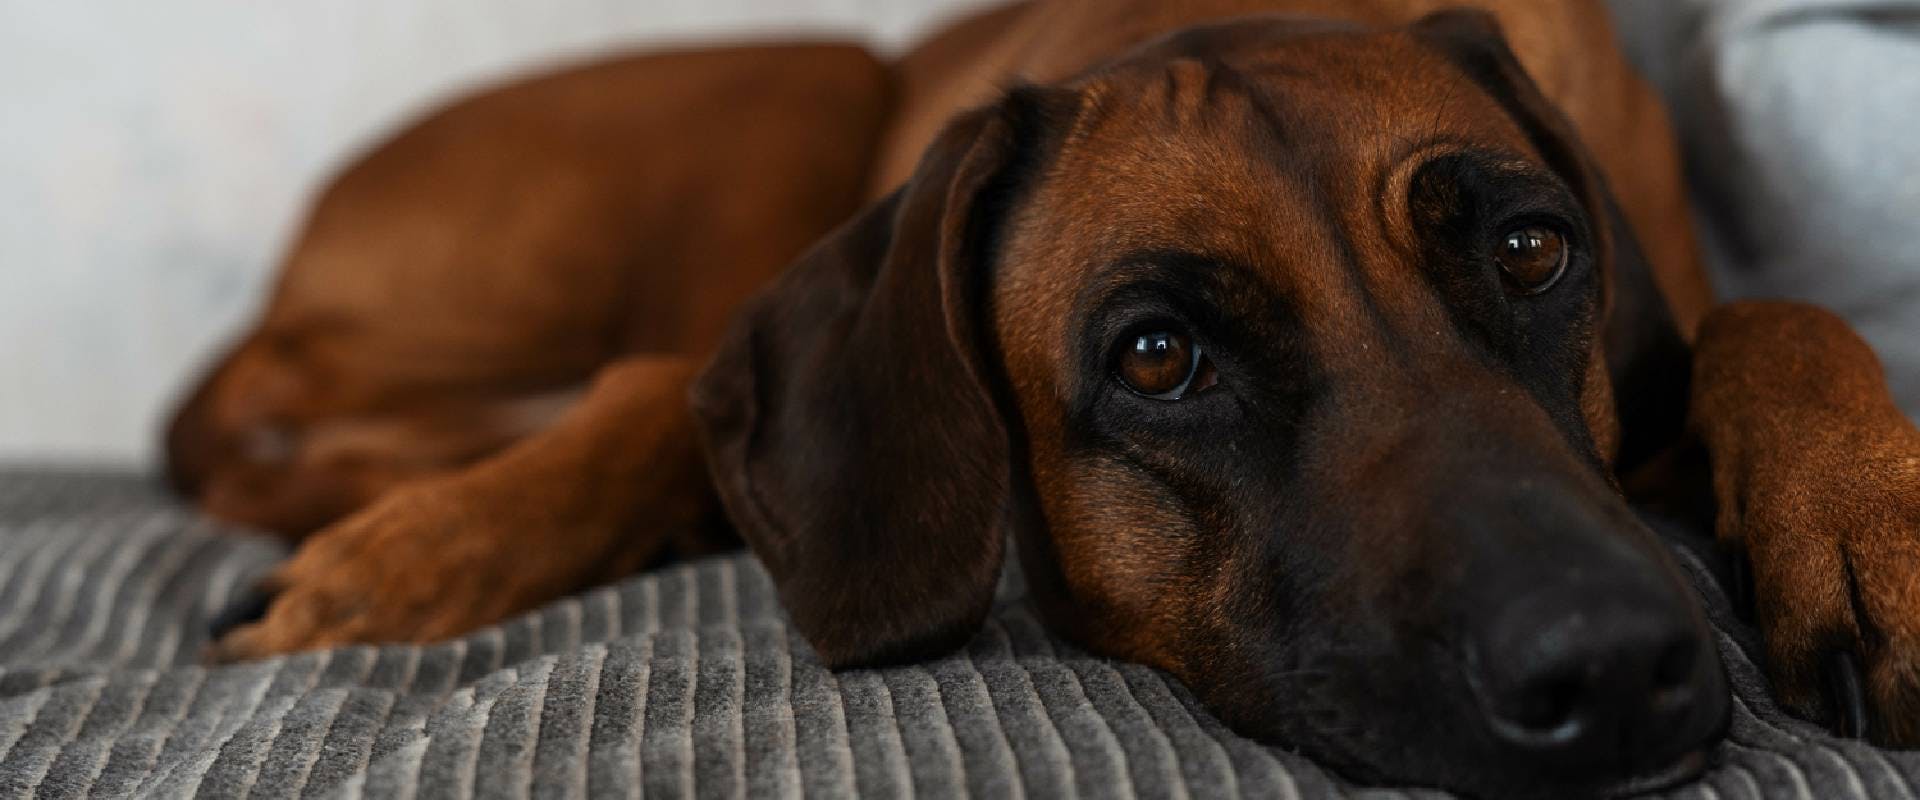 African Ridgeback laying on a bed, close up